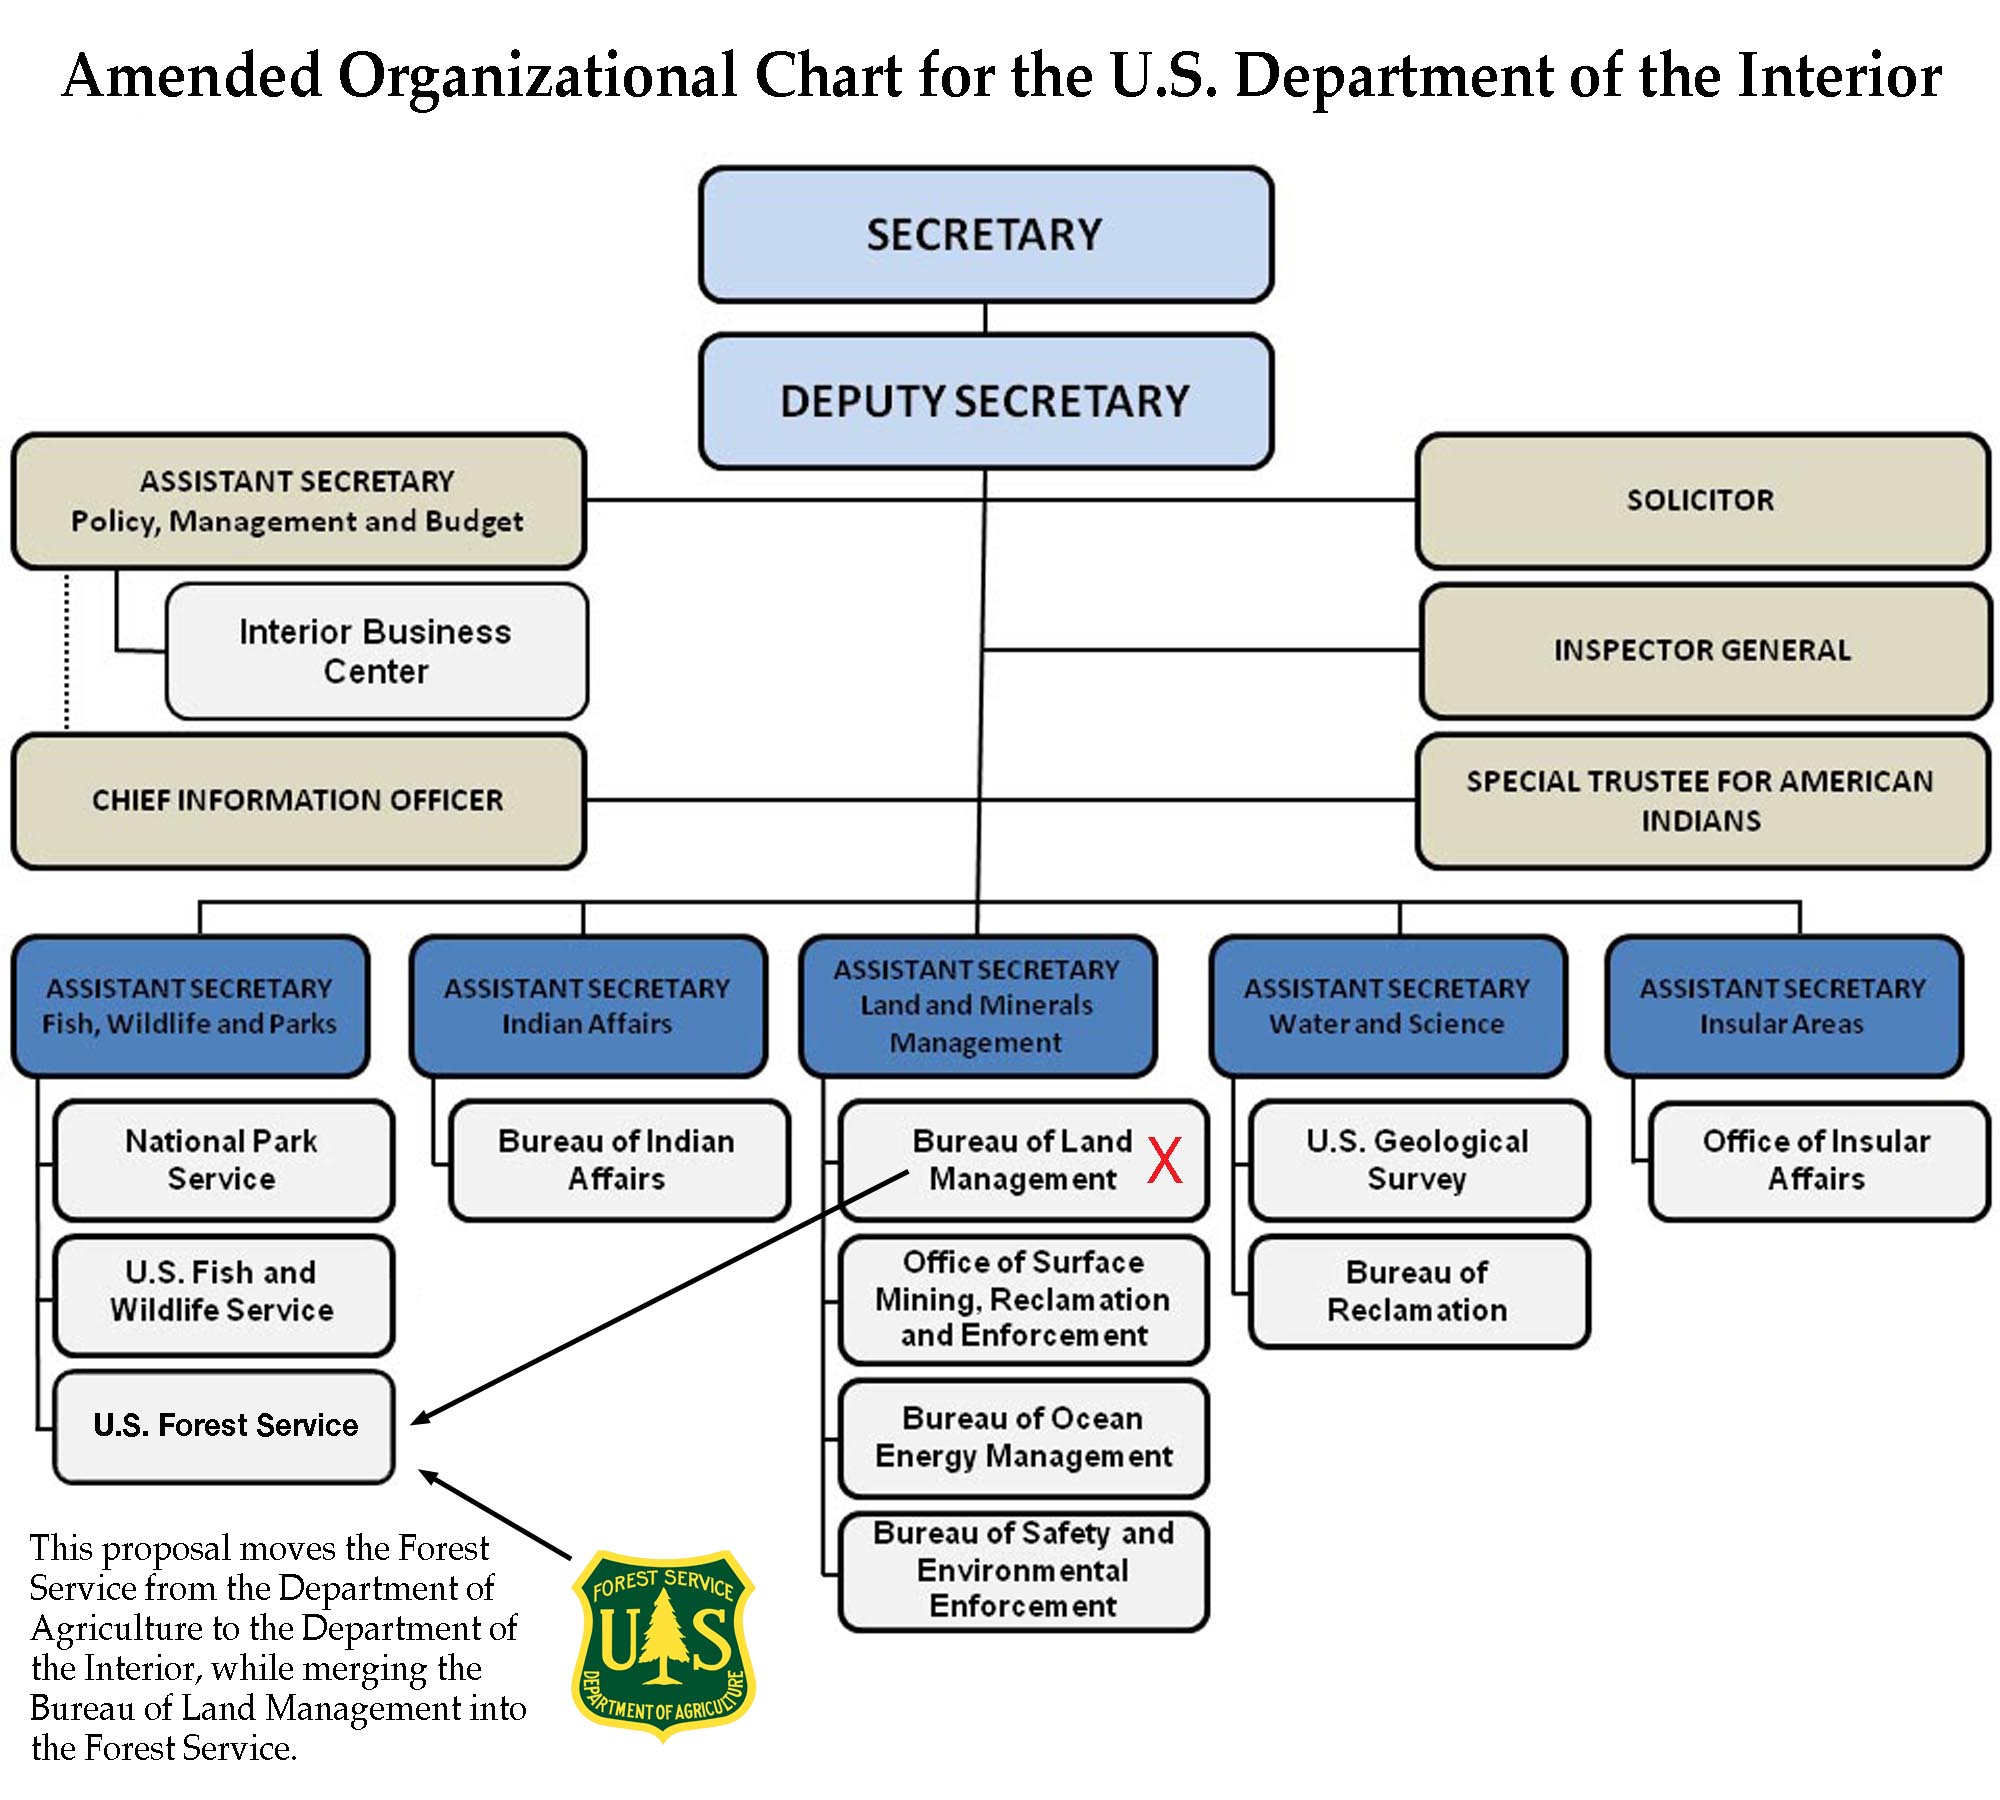 Amended Organizational Chart for the U.S. Department of the Interior